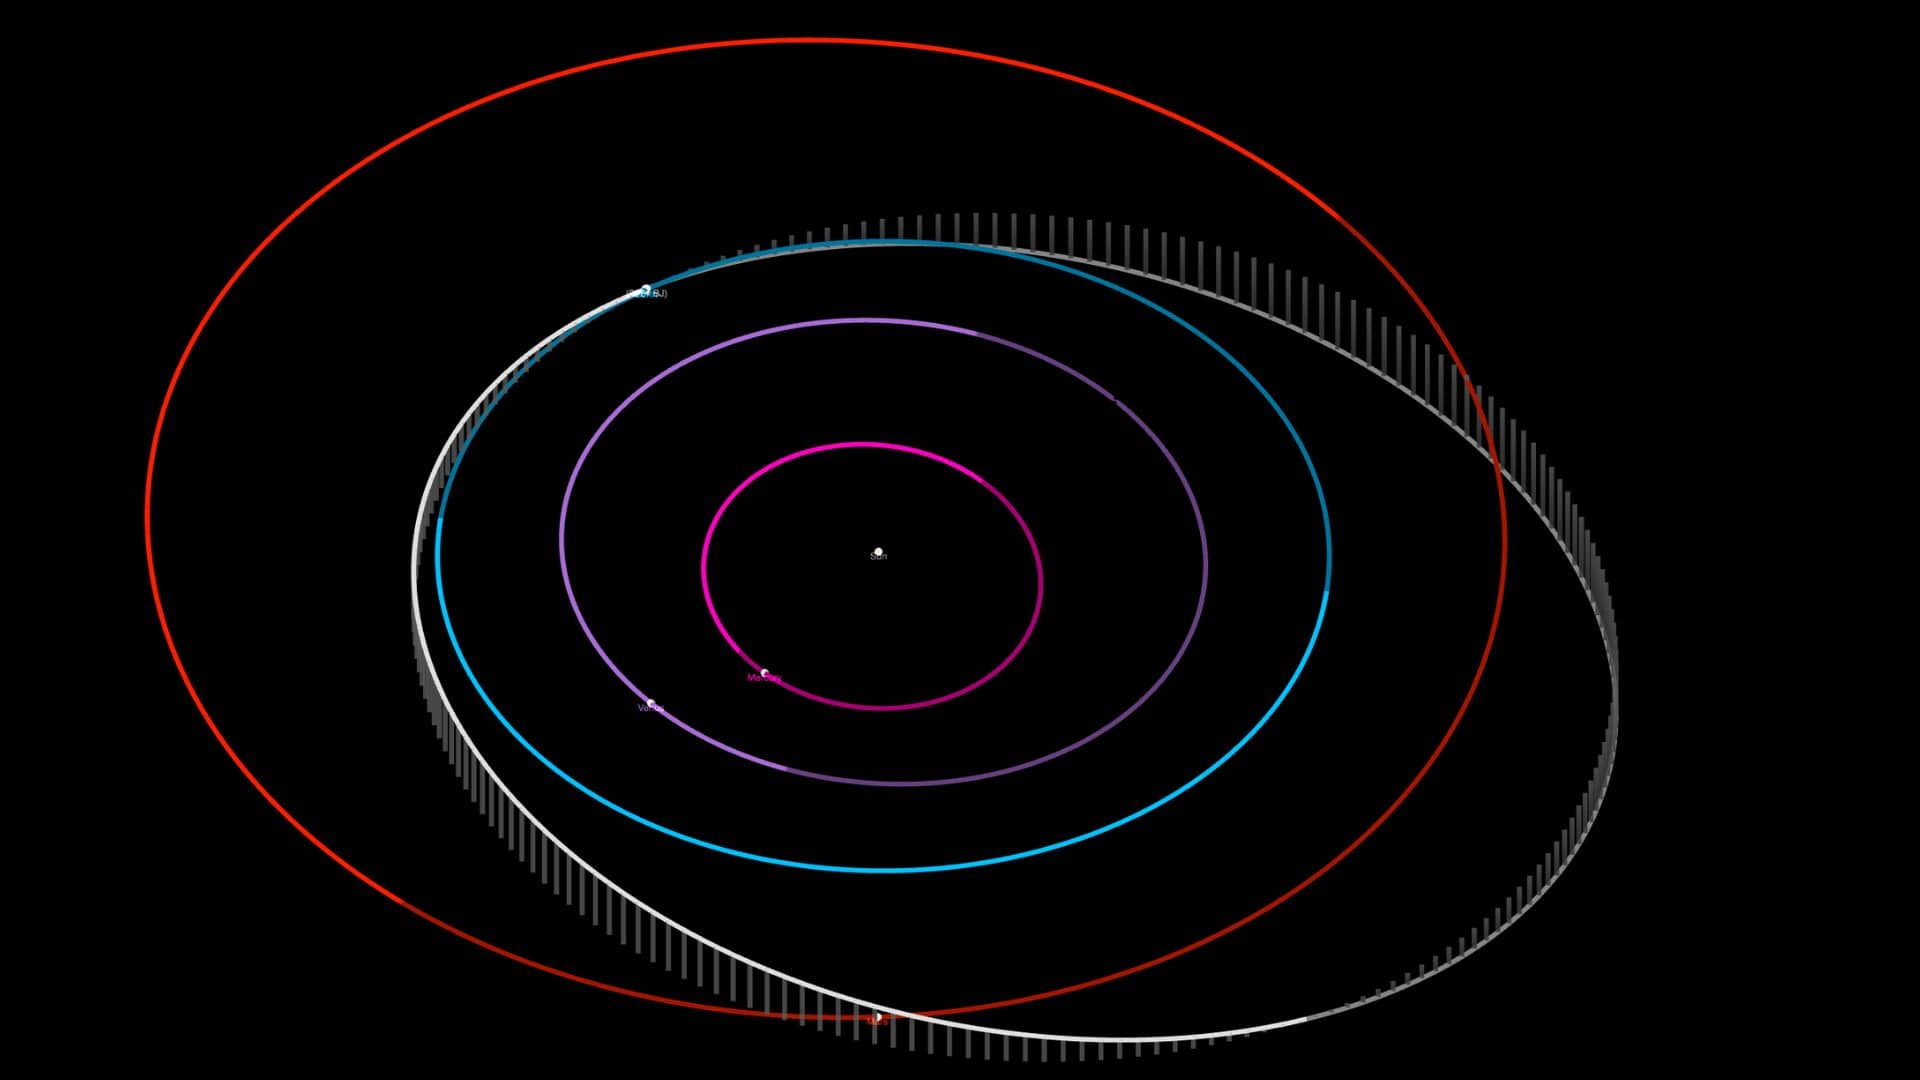 A newly discovered asteroid to pass between Earth and Moon on January